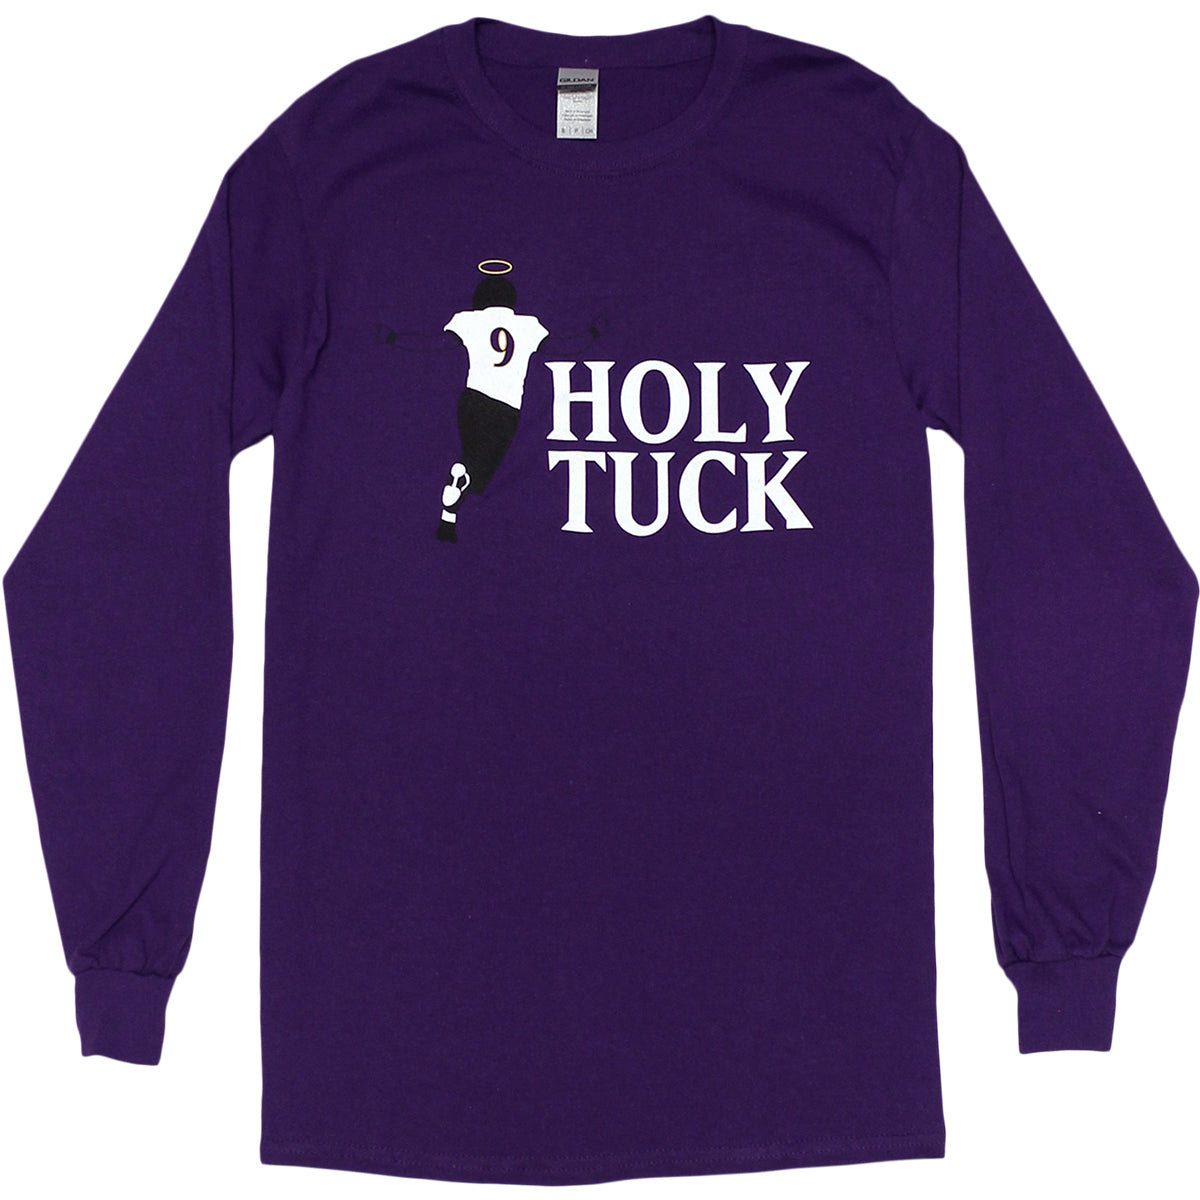 Holy Tuck (Purple) / Long Sleeve Shirt - Route One Apparel